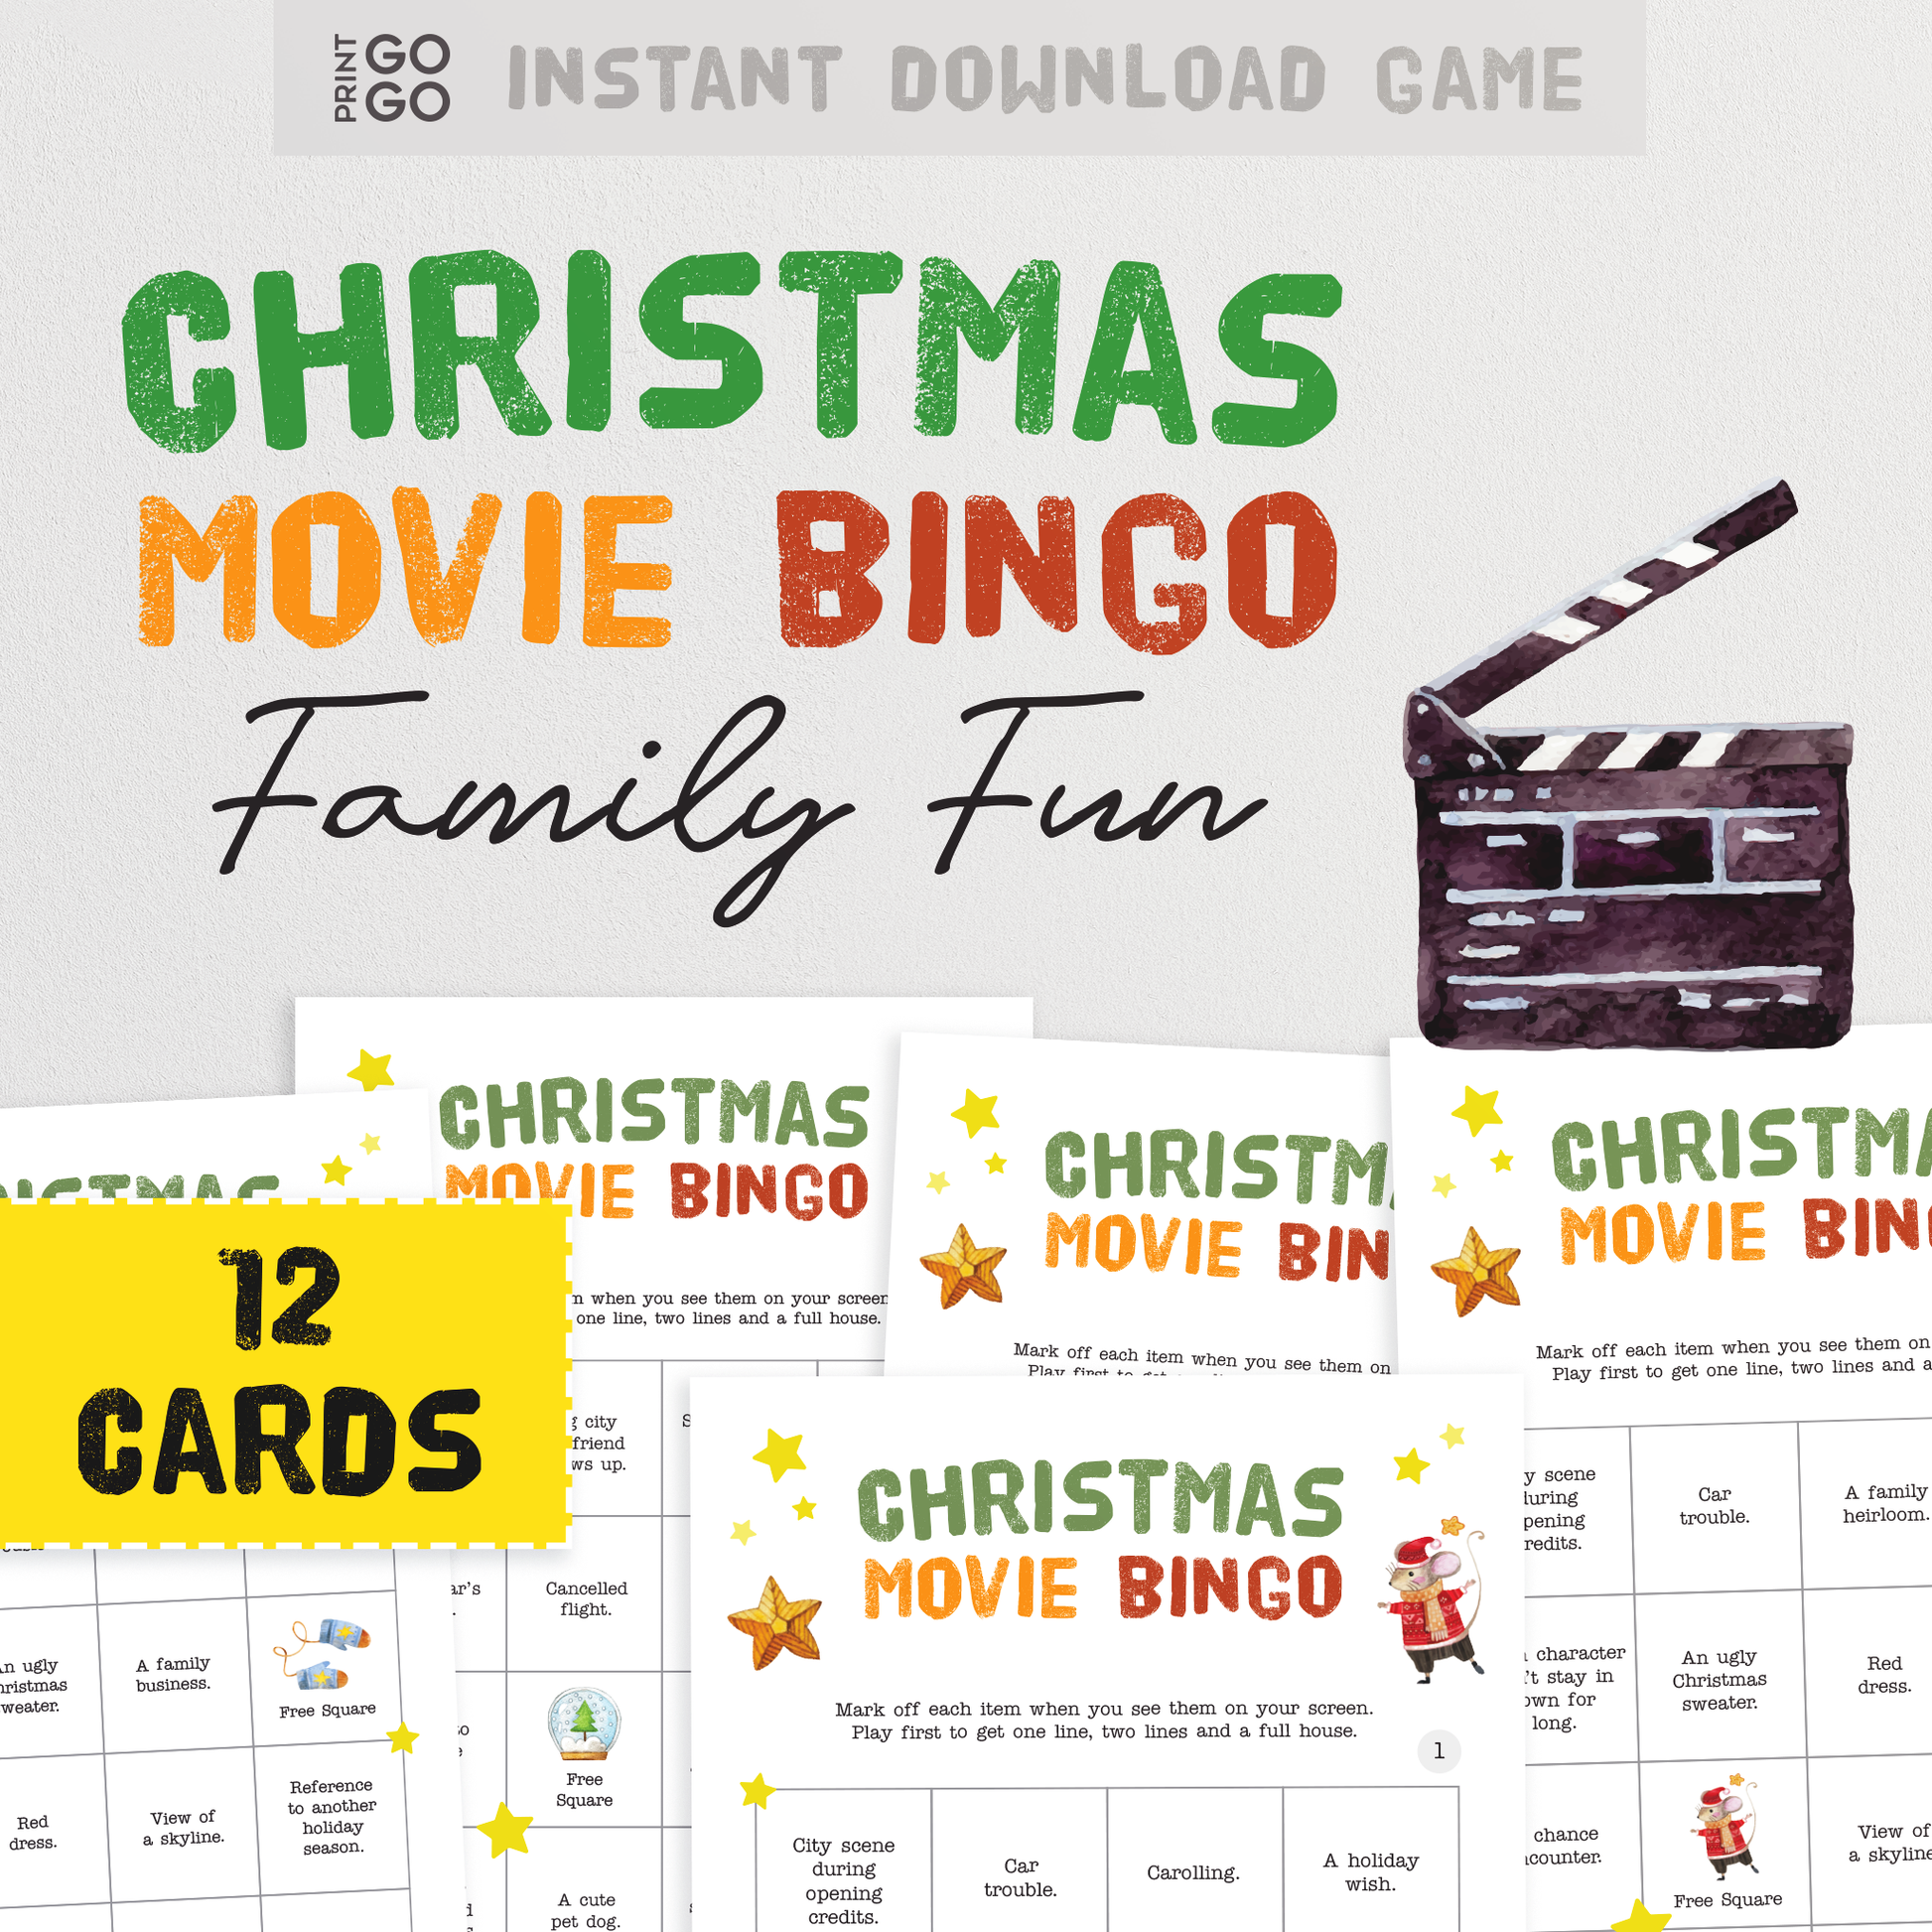 12 Christmas Movie Bingo Cards - The Family Friendly Game of Watching TV and Paying Attention | Xmas Teen Game | Holiday Bingo Cards